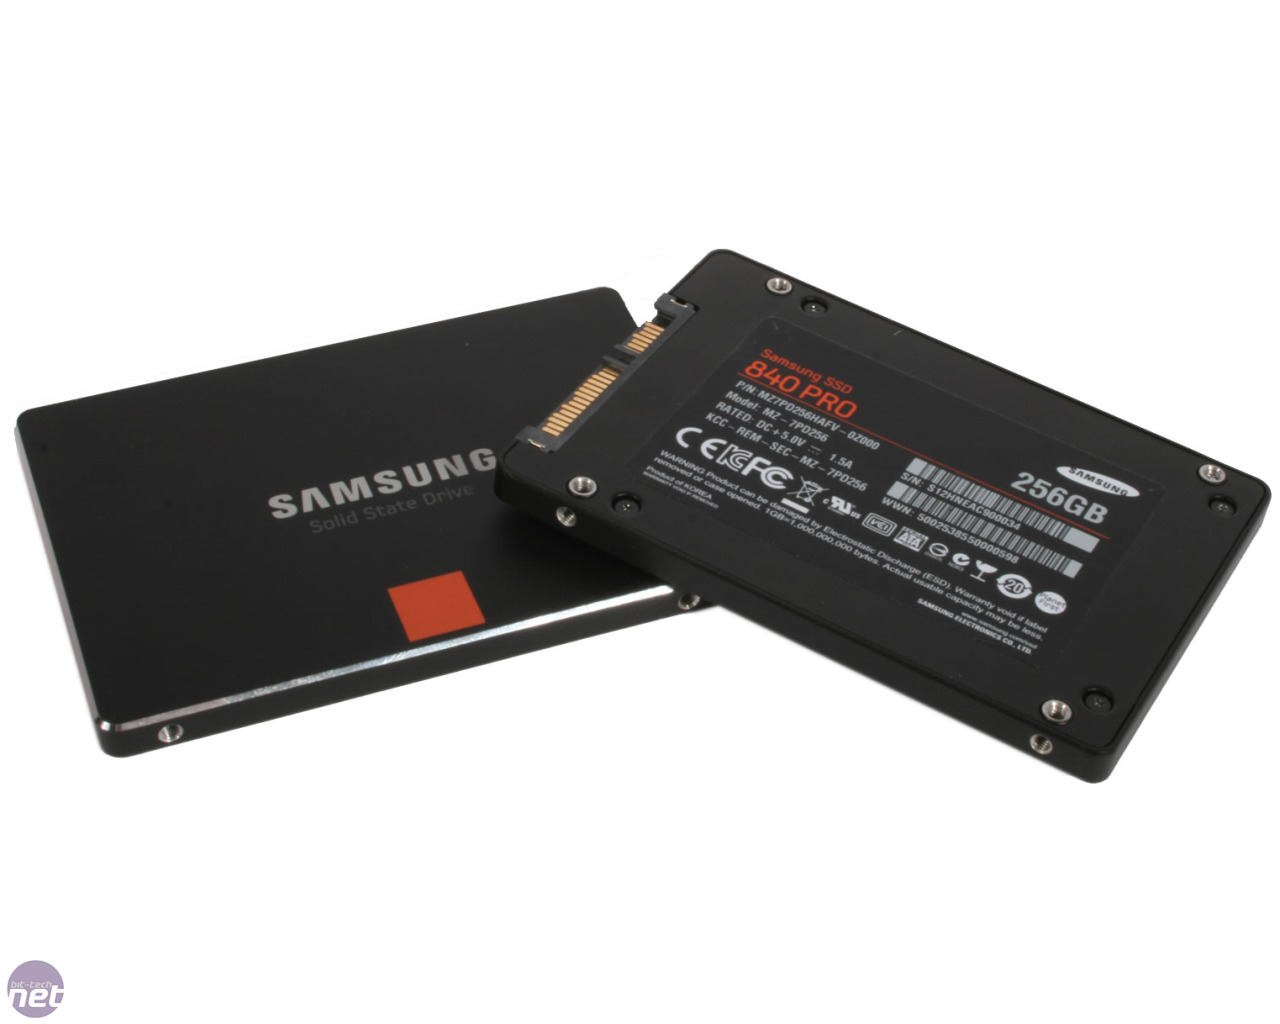 Samsung Ssd 840 Pro Review